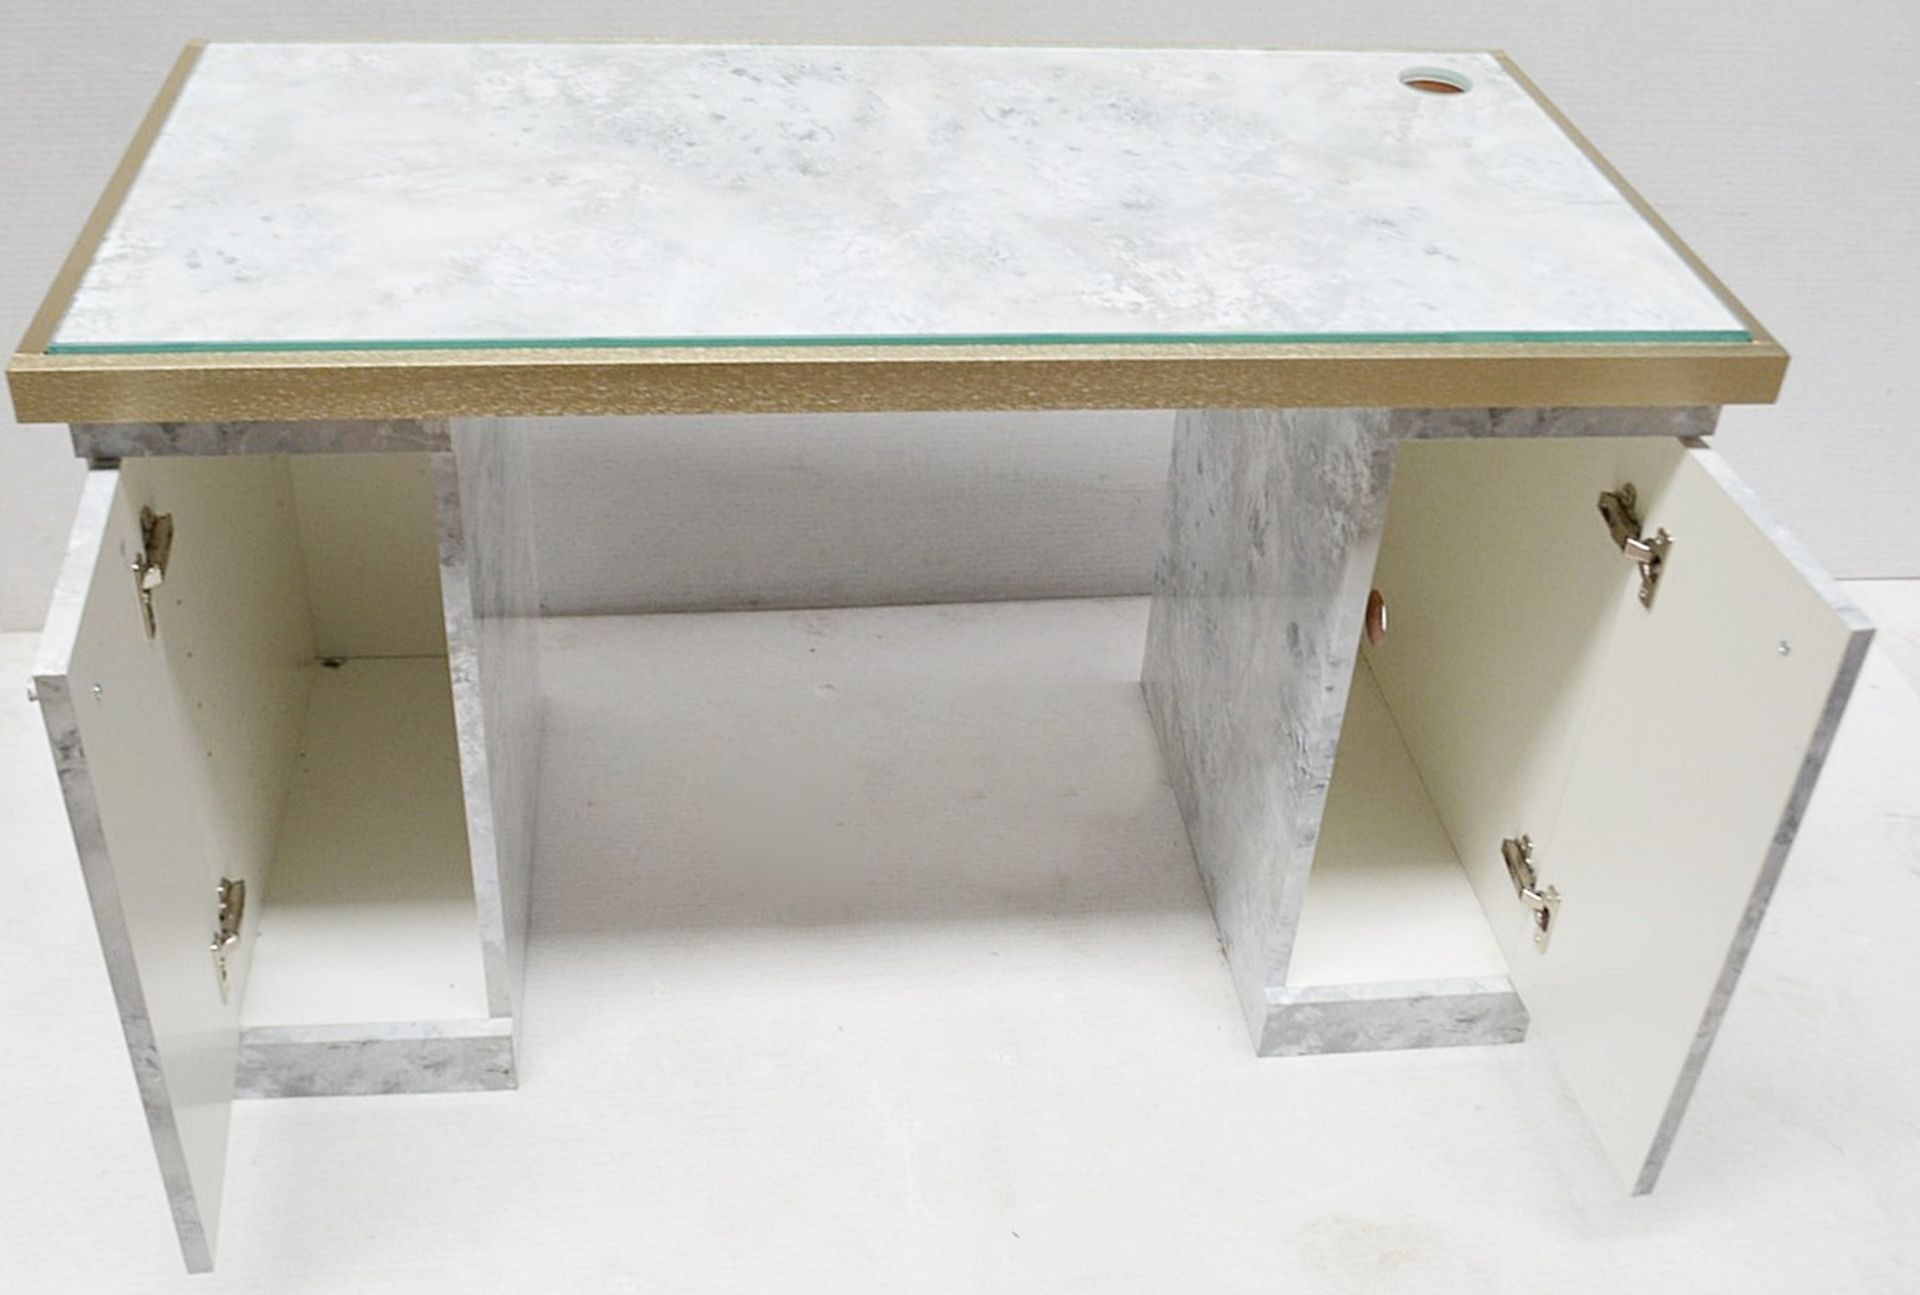 1 x BALDI Designer Retail Display Table / Desk Featuring A Marble Effect Aesthetic - Image 3 of 8